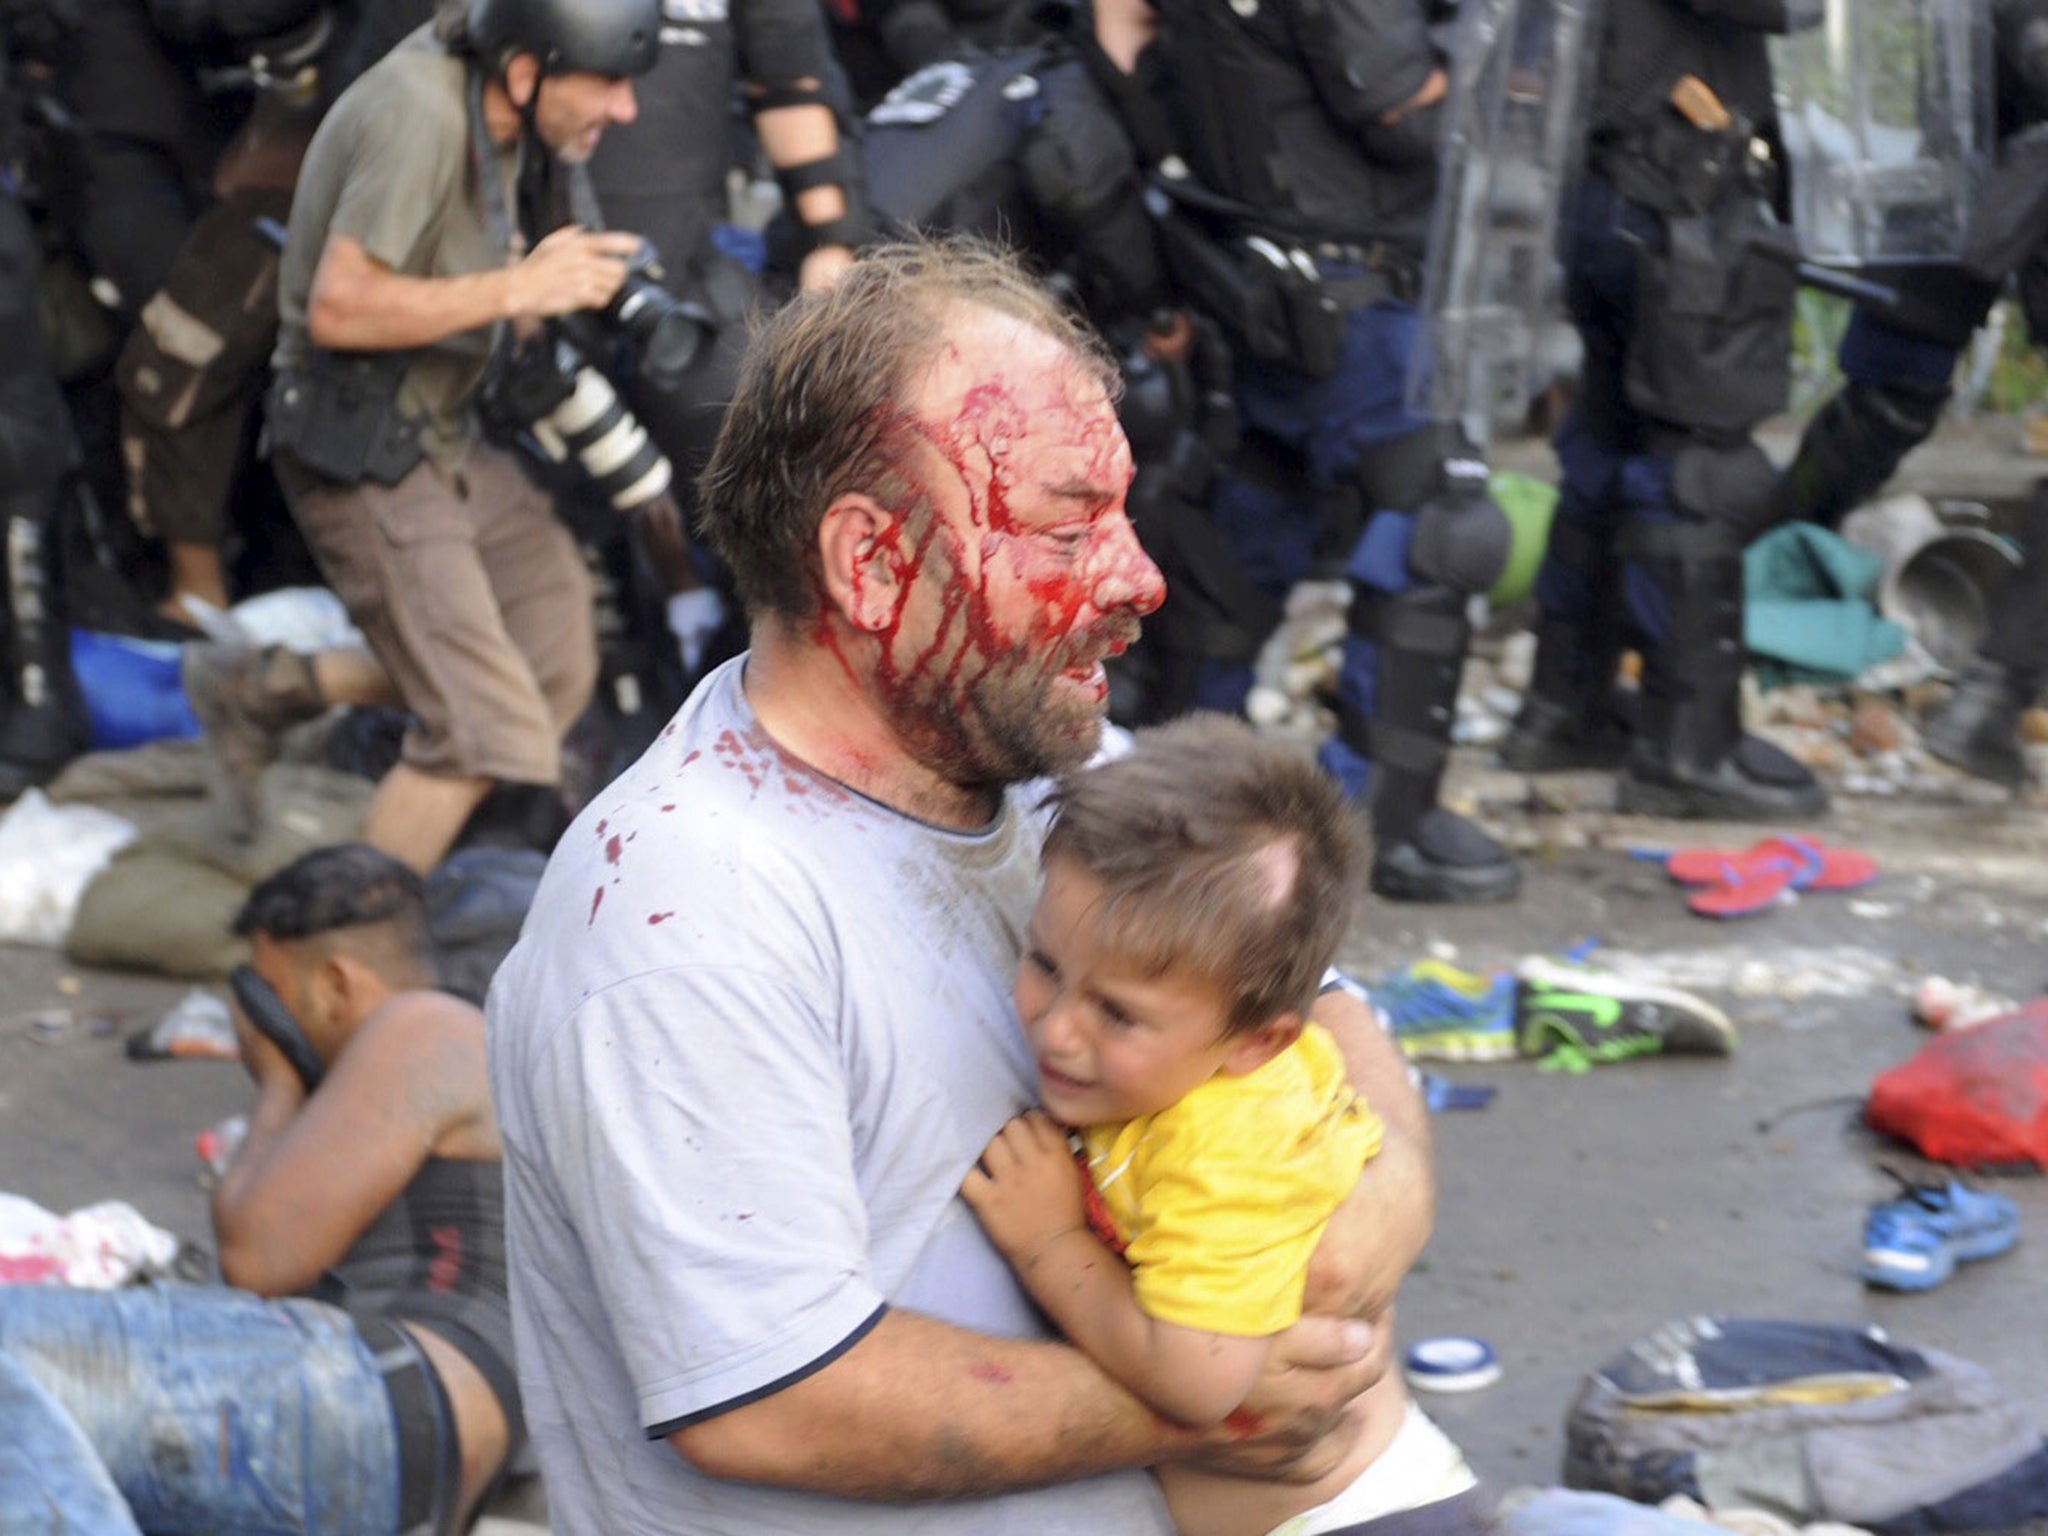 Hungary’s border closure has seen refugees beaten and tear gassed by police